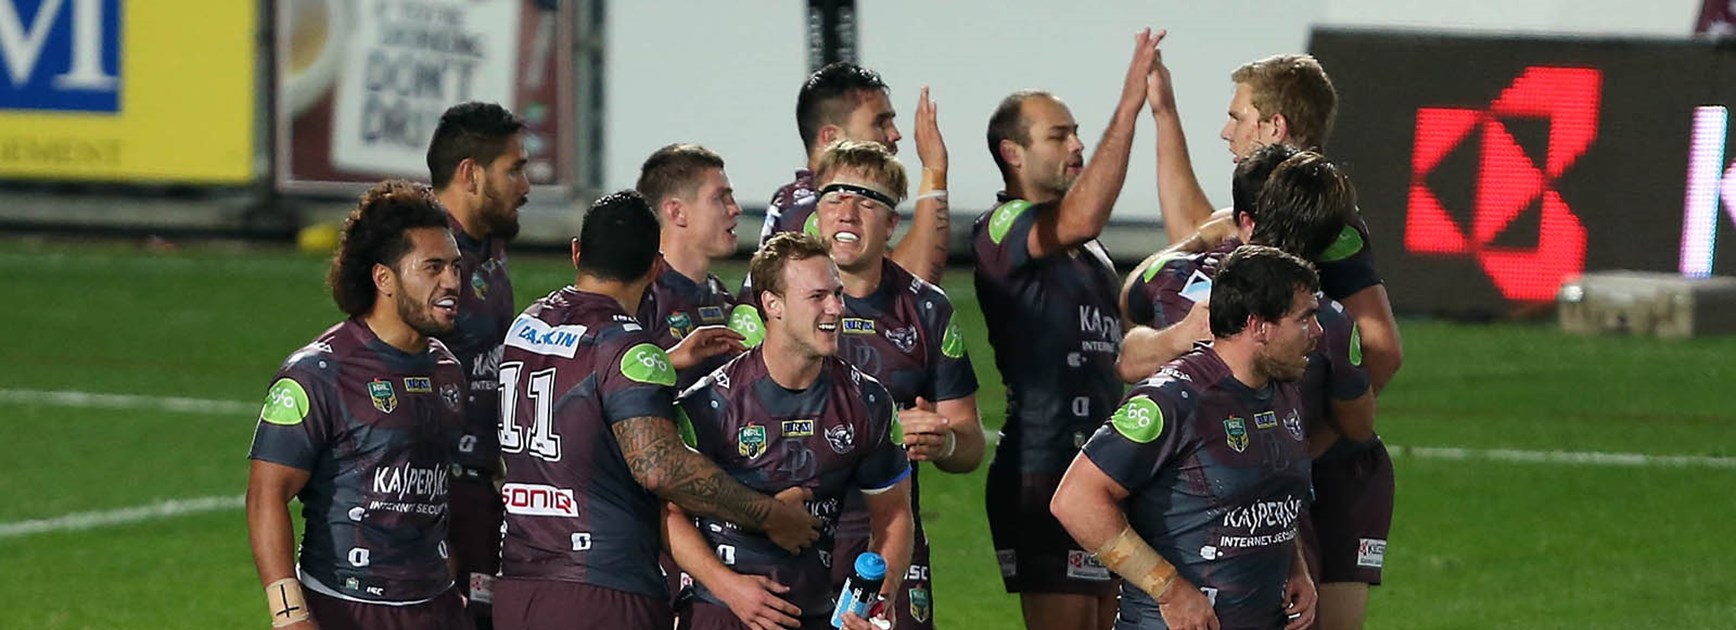 Manly players celebrate another try against the Broncos in Round 21.